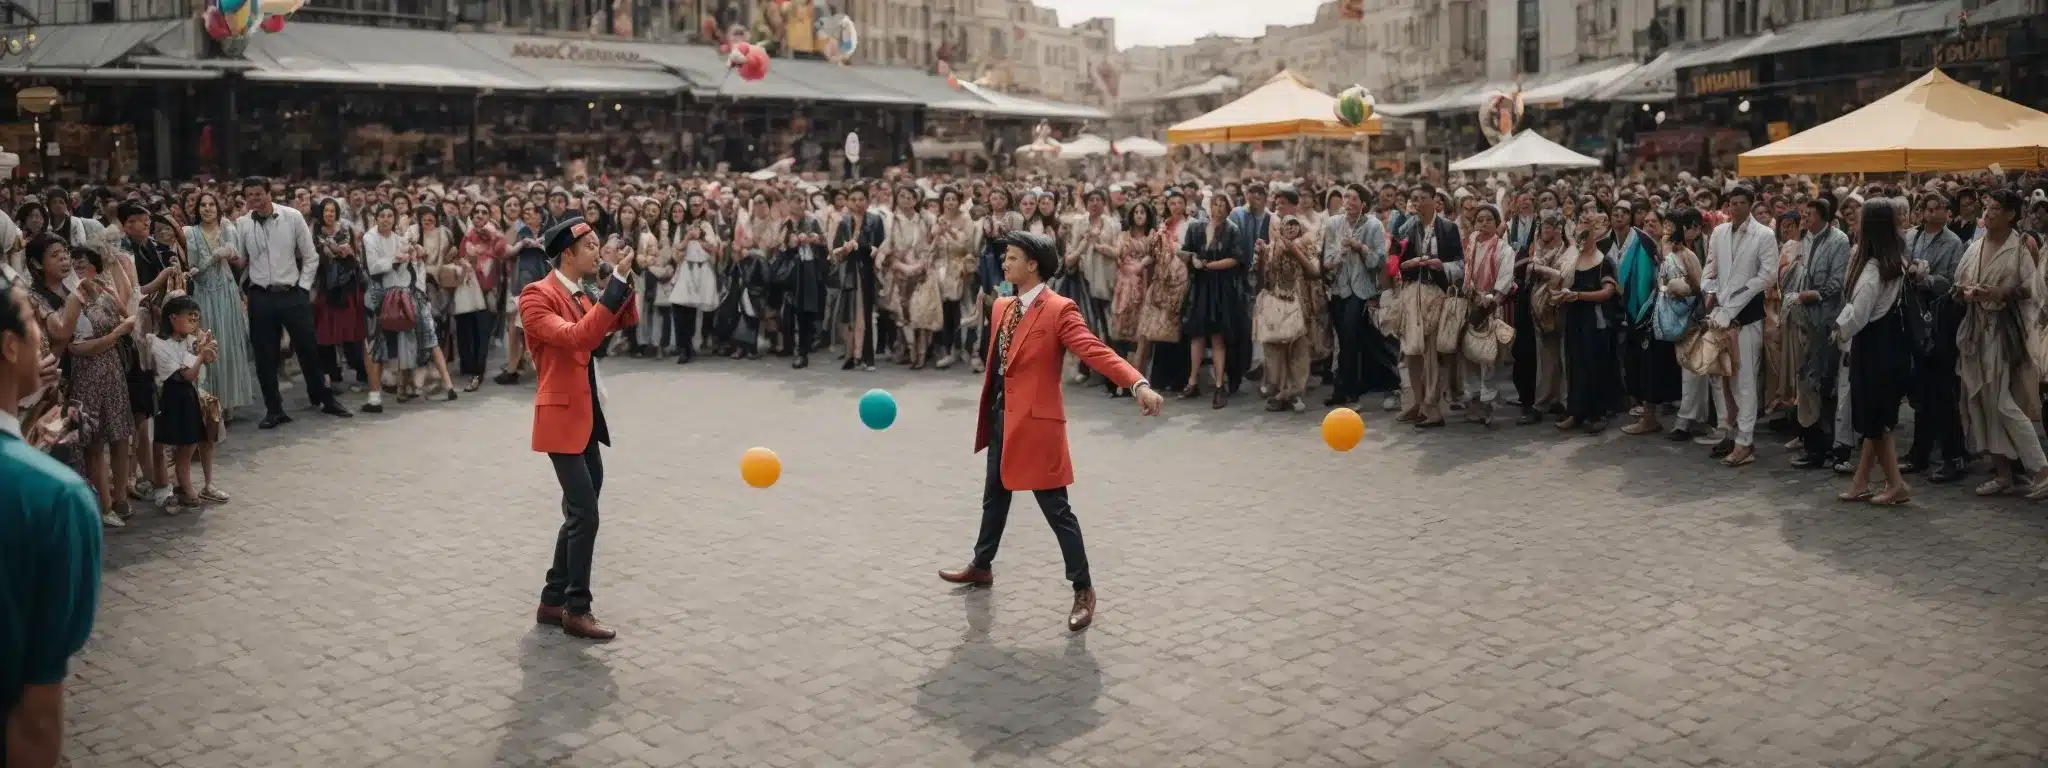 A Flamboyant Juggler Performs In The Center Of A Busy Digital Market Square, Drawing The Attention Of An Intrigued Crowd.